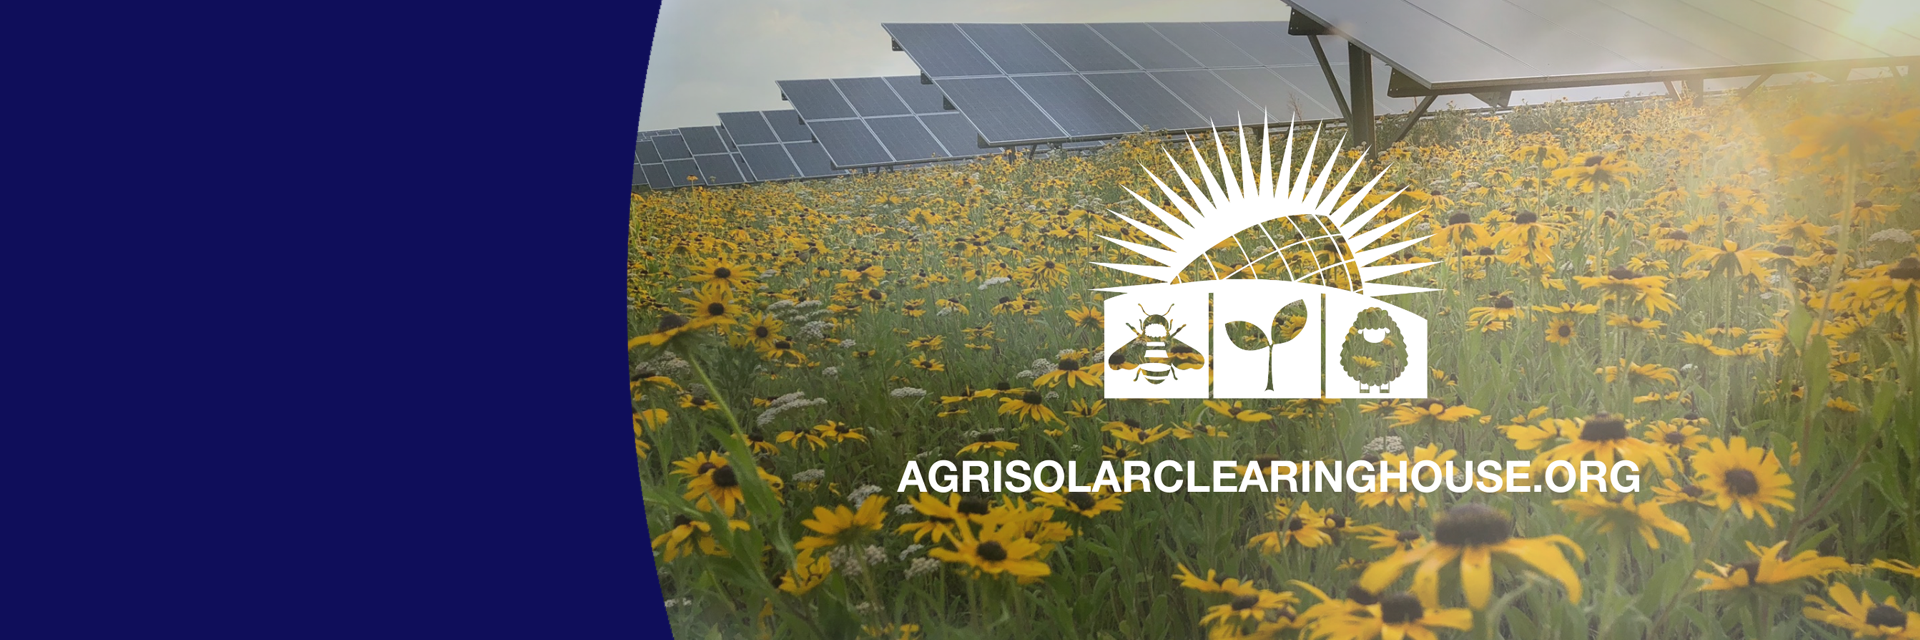 AgriSolar Clearinghouse - Solar Panels